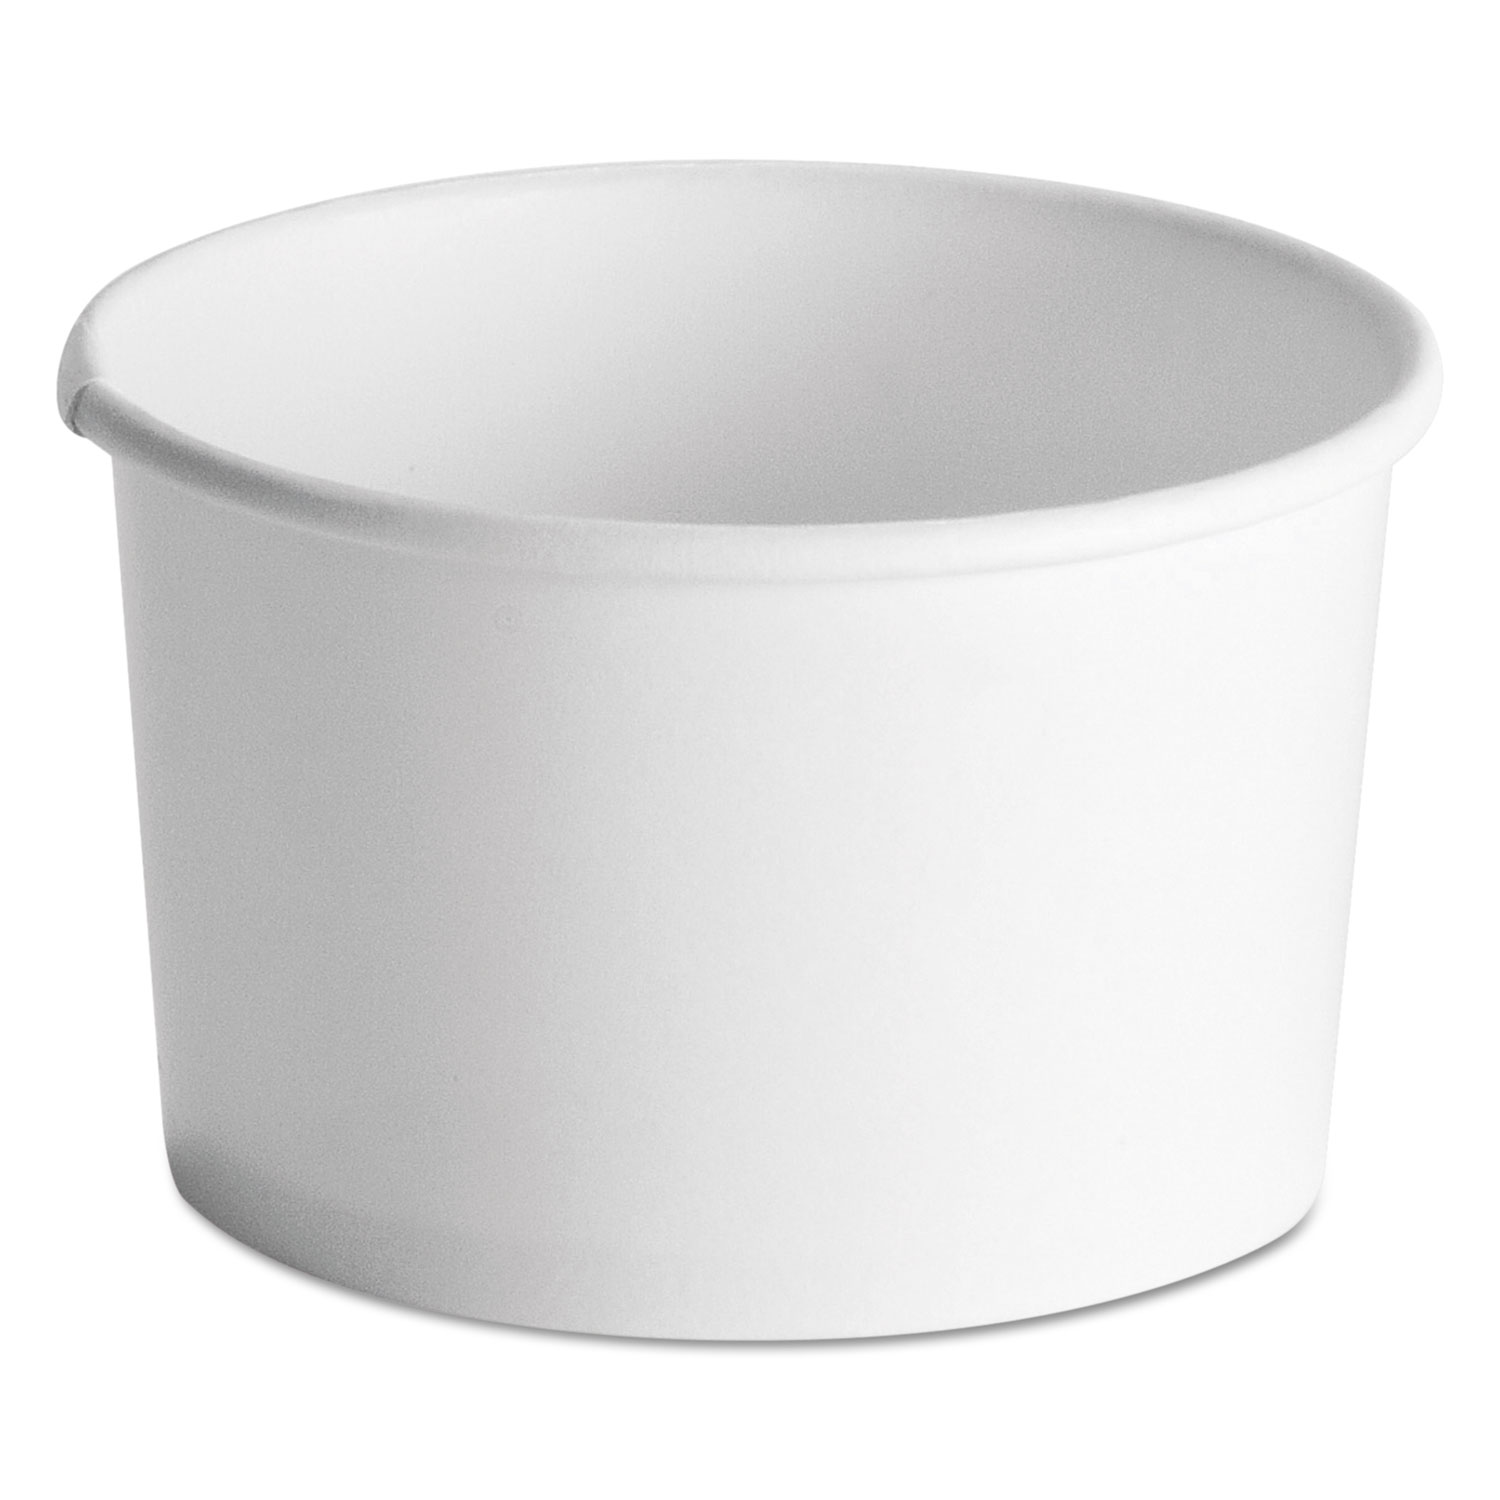  Chinet 71037 Squat Paper Food Container, Streetside Design, 8-10oz, White, 50/Pack, 20/CT (HUH71037) 